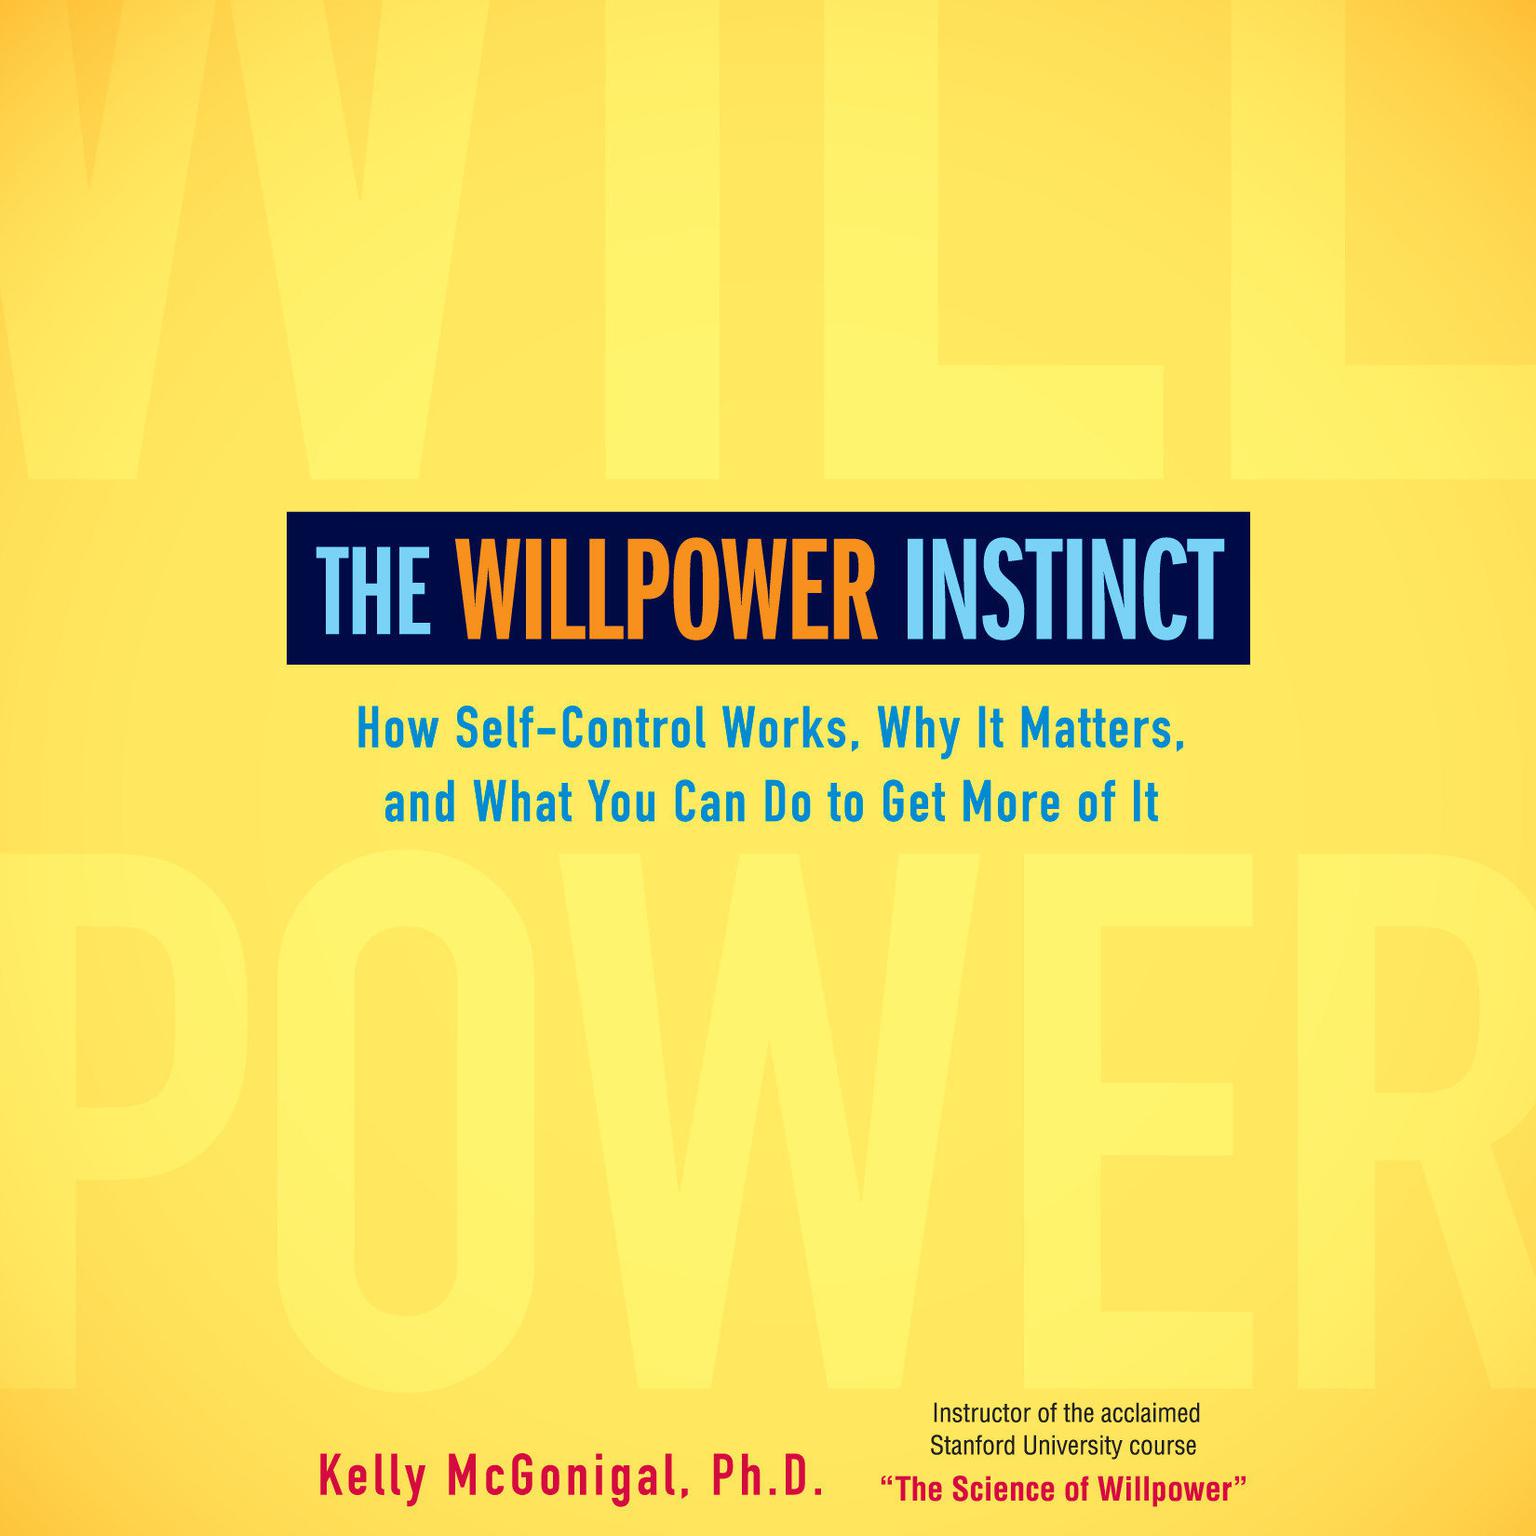 The Willpower Instinct: How Self-Control Works, Why It Matters, and What You Can Do To Get More of It Audiobook, by Kelly McGonigal